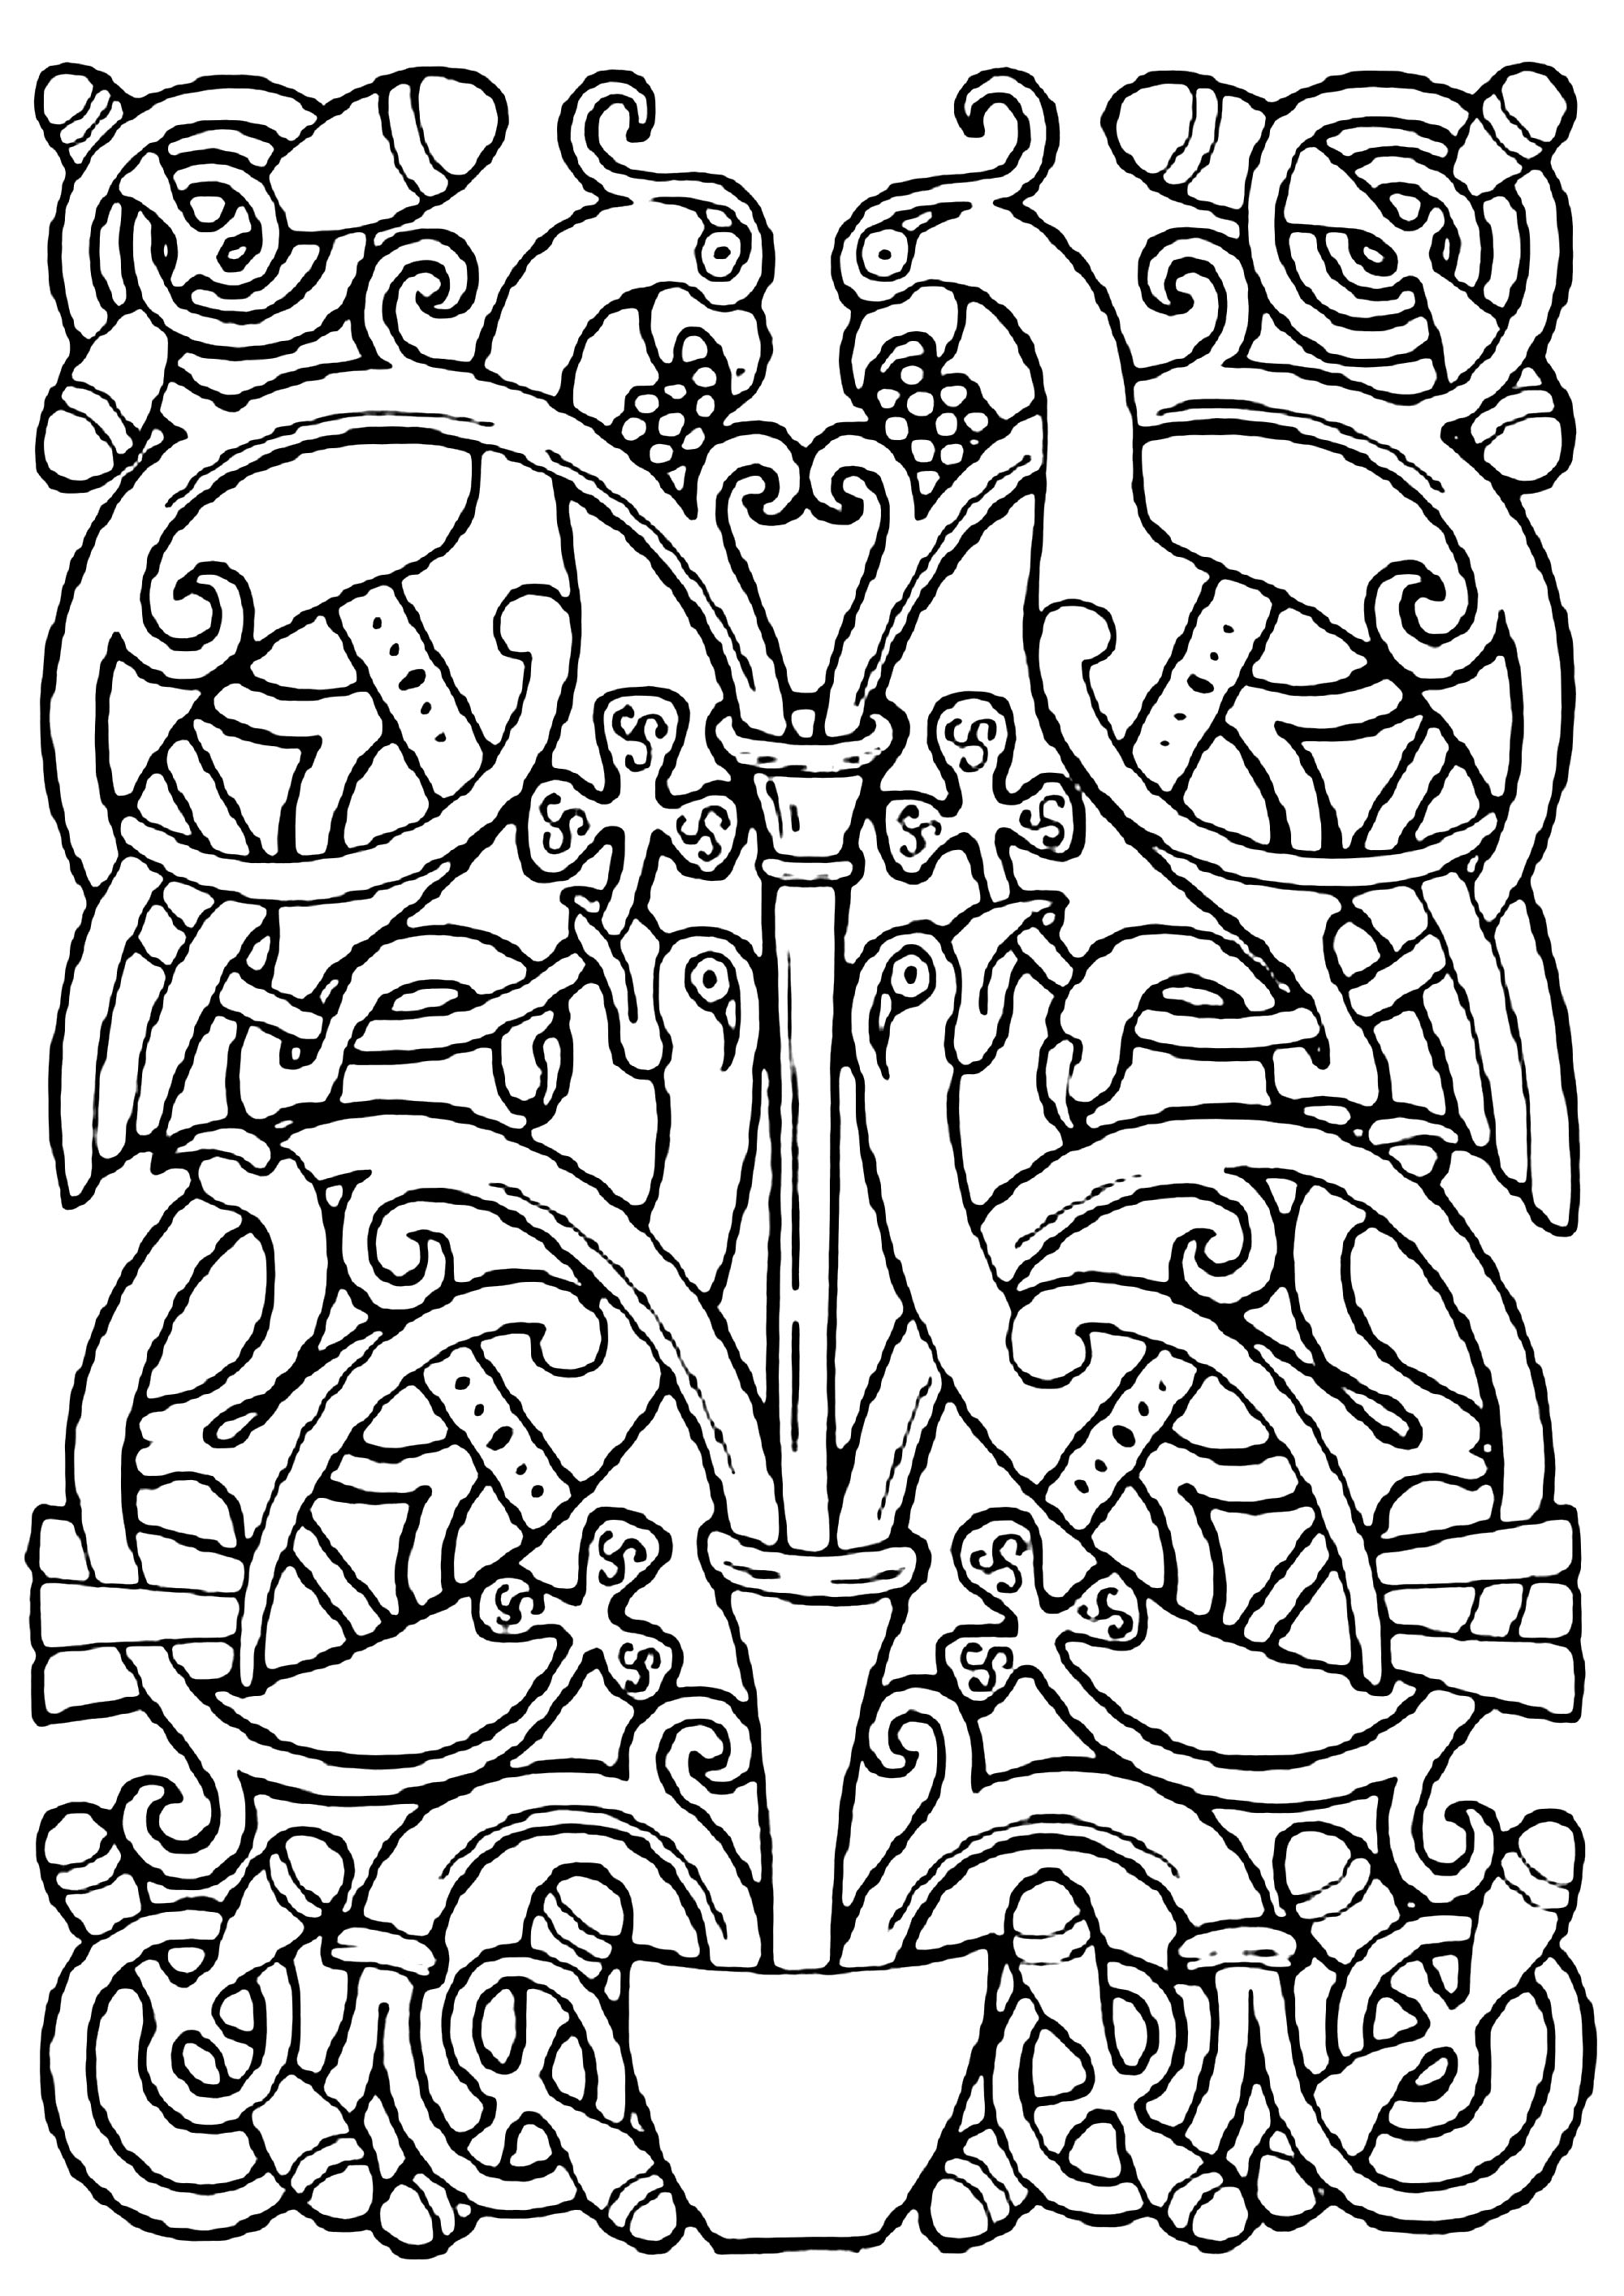 Celtic design of birds, with interwoven Celtic designs. This illustration looks like those found in medieval manuscripts such as The Book of Kells.